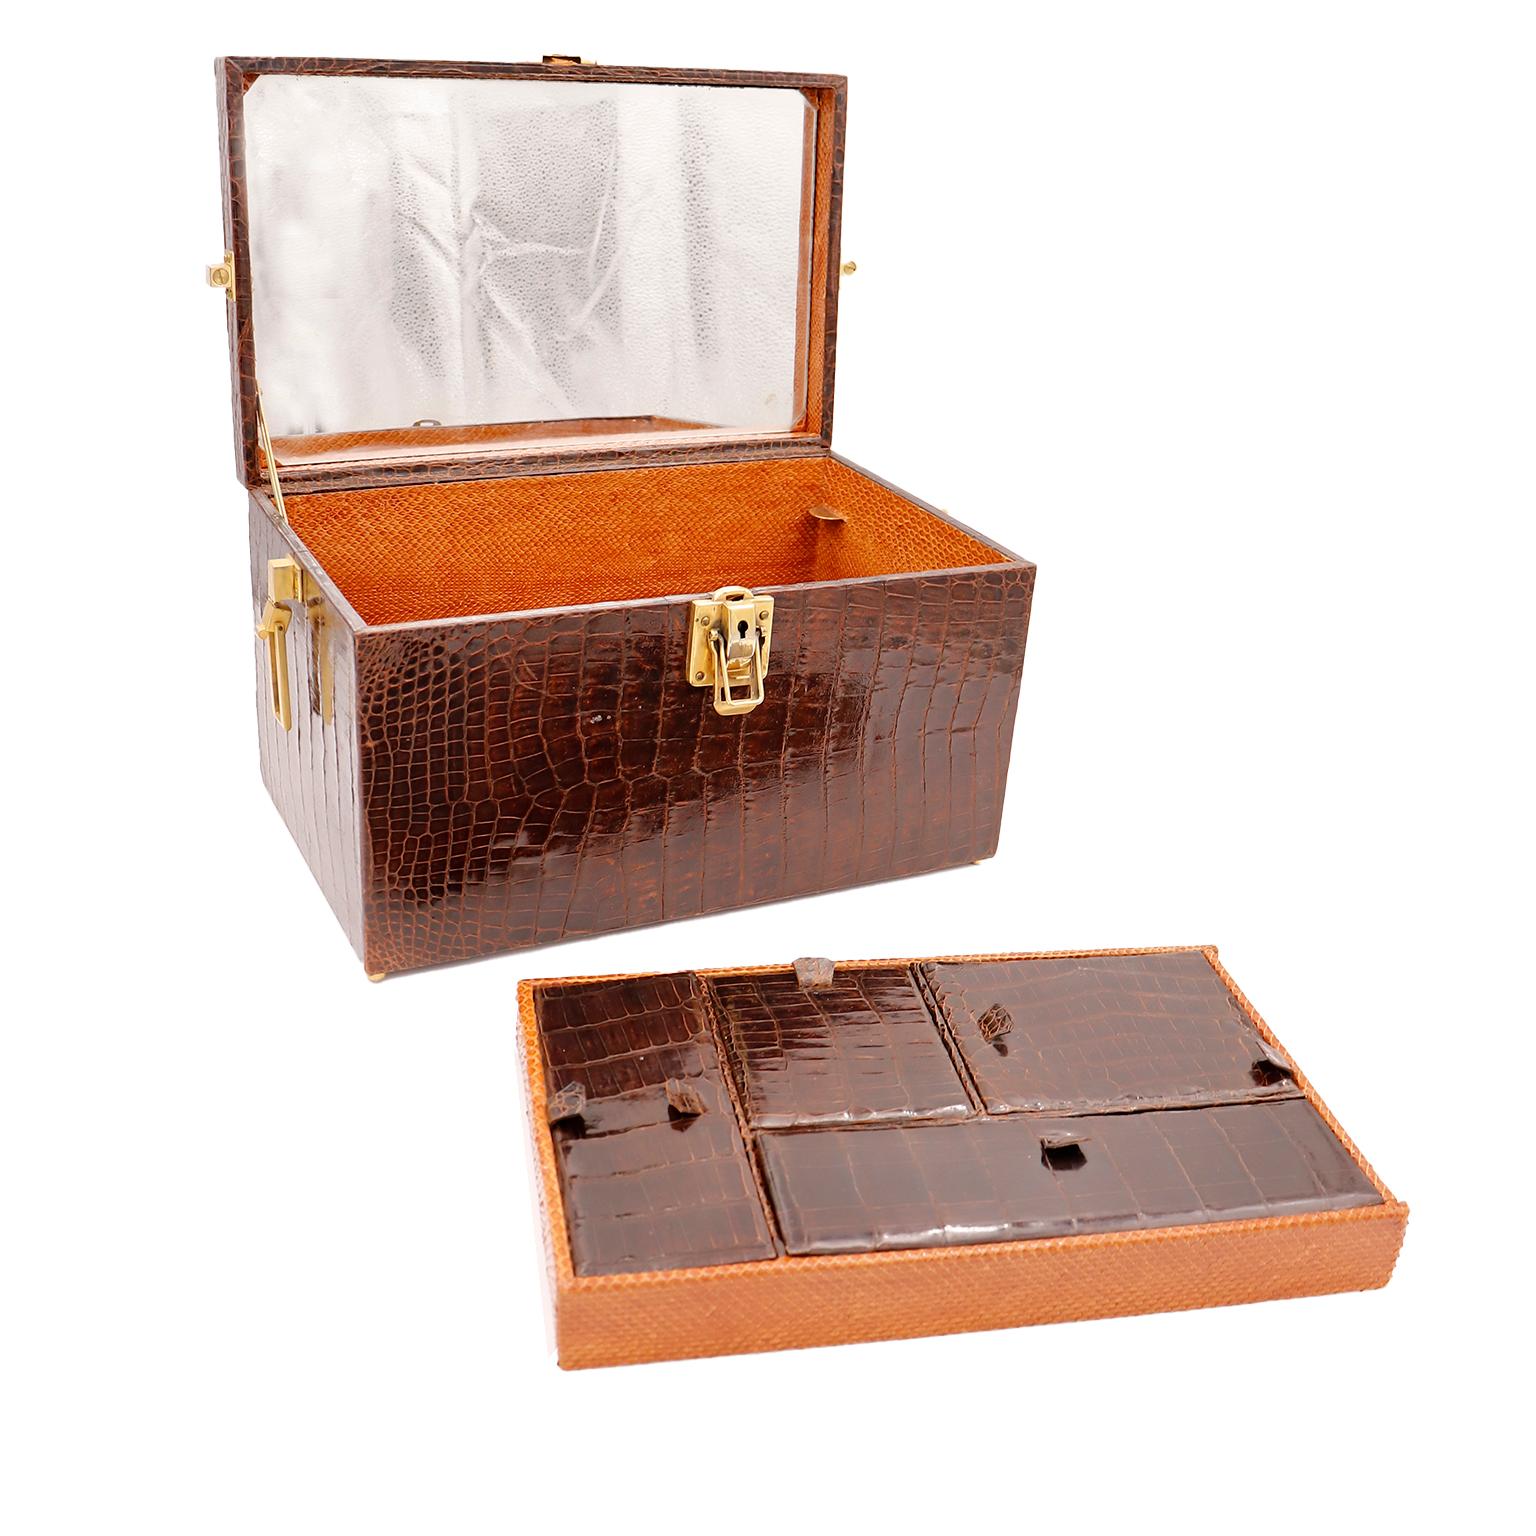 This exceptional vintage alligator train case once belonged to an elegant Countess who lived in London and Manhattan from the late 1800's through the mid 20th Century. She traveled with Goyard trunks and had nothing but the finest accessories. This